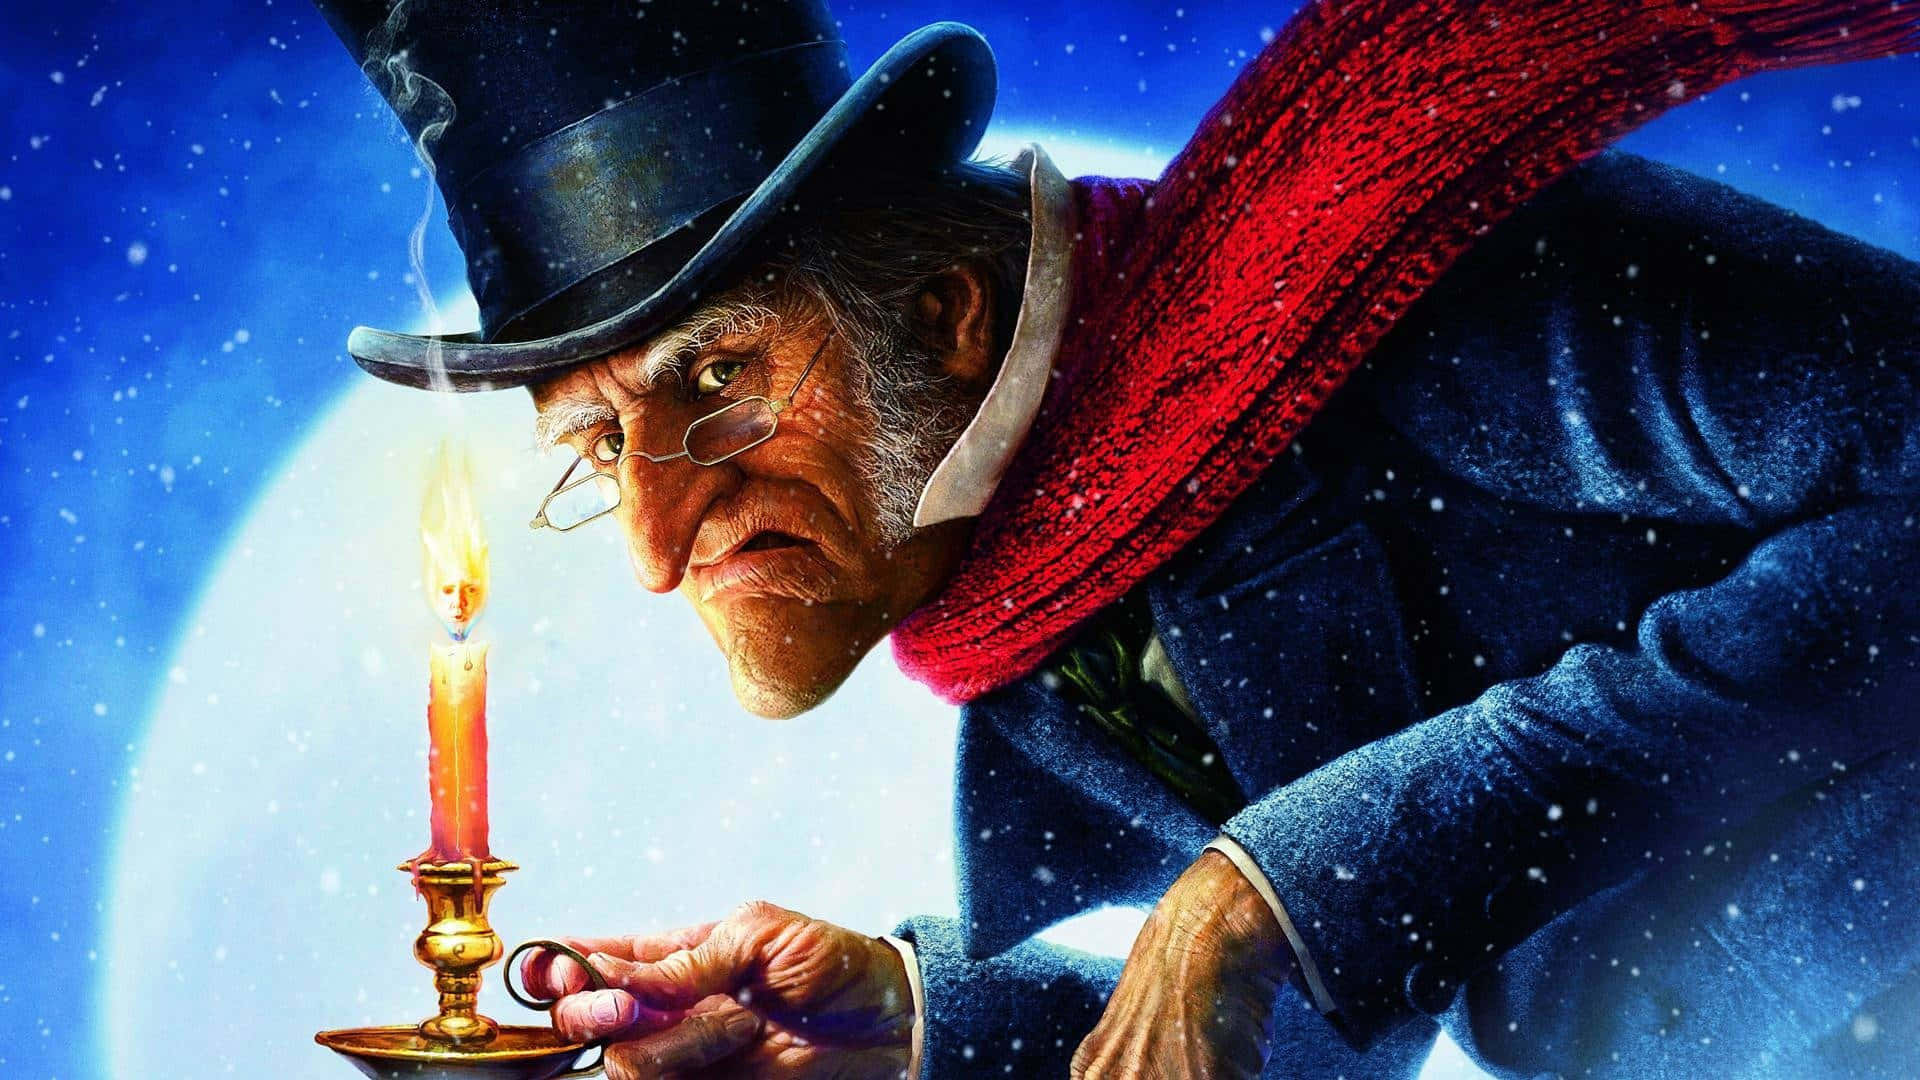 A Man In A Coat And Hat Is Holding A Candle